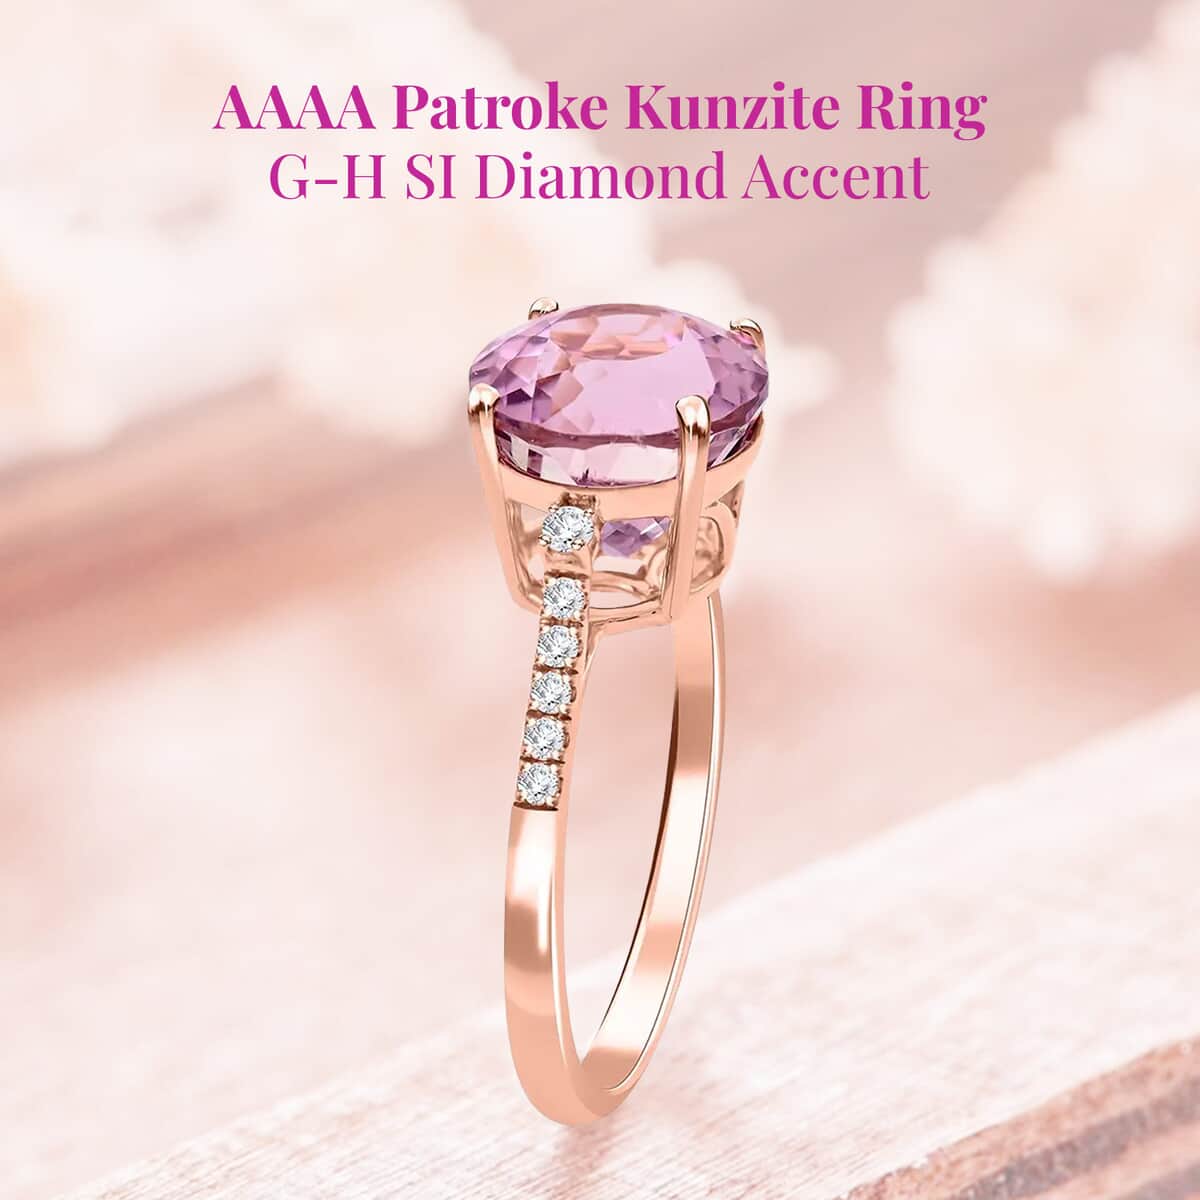 Certified & Appraised Iliana 18K Rose Gold AAAA Patroke Kunzite and G-H SI Diamond Ring (Size 10.0) 3.85 ctw image number 2